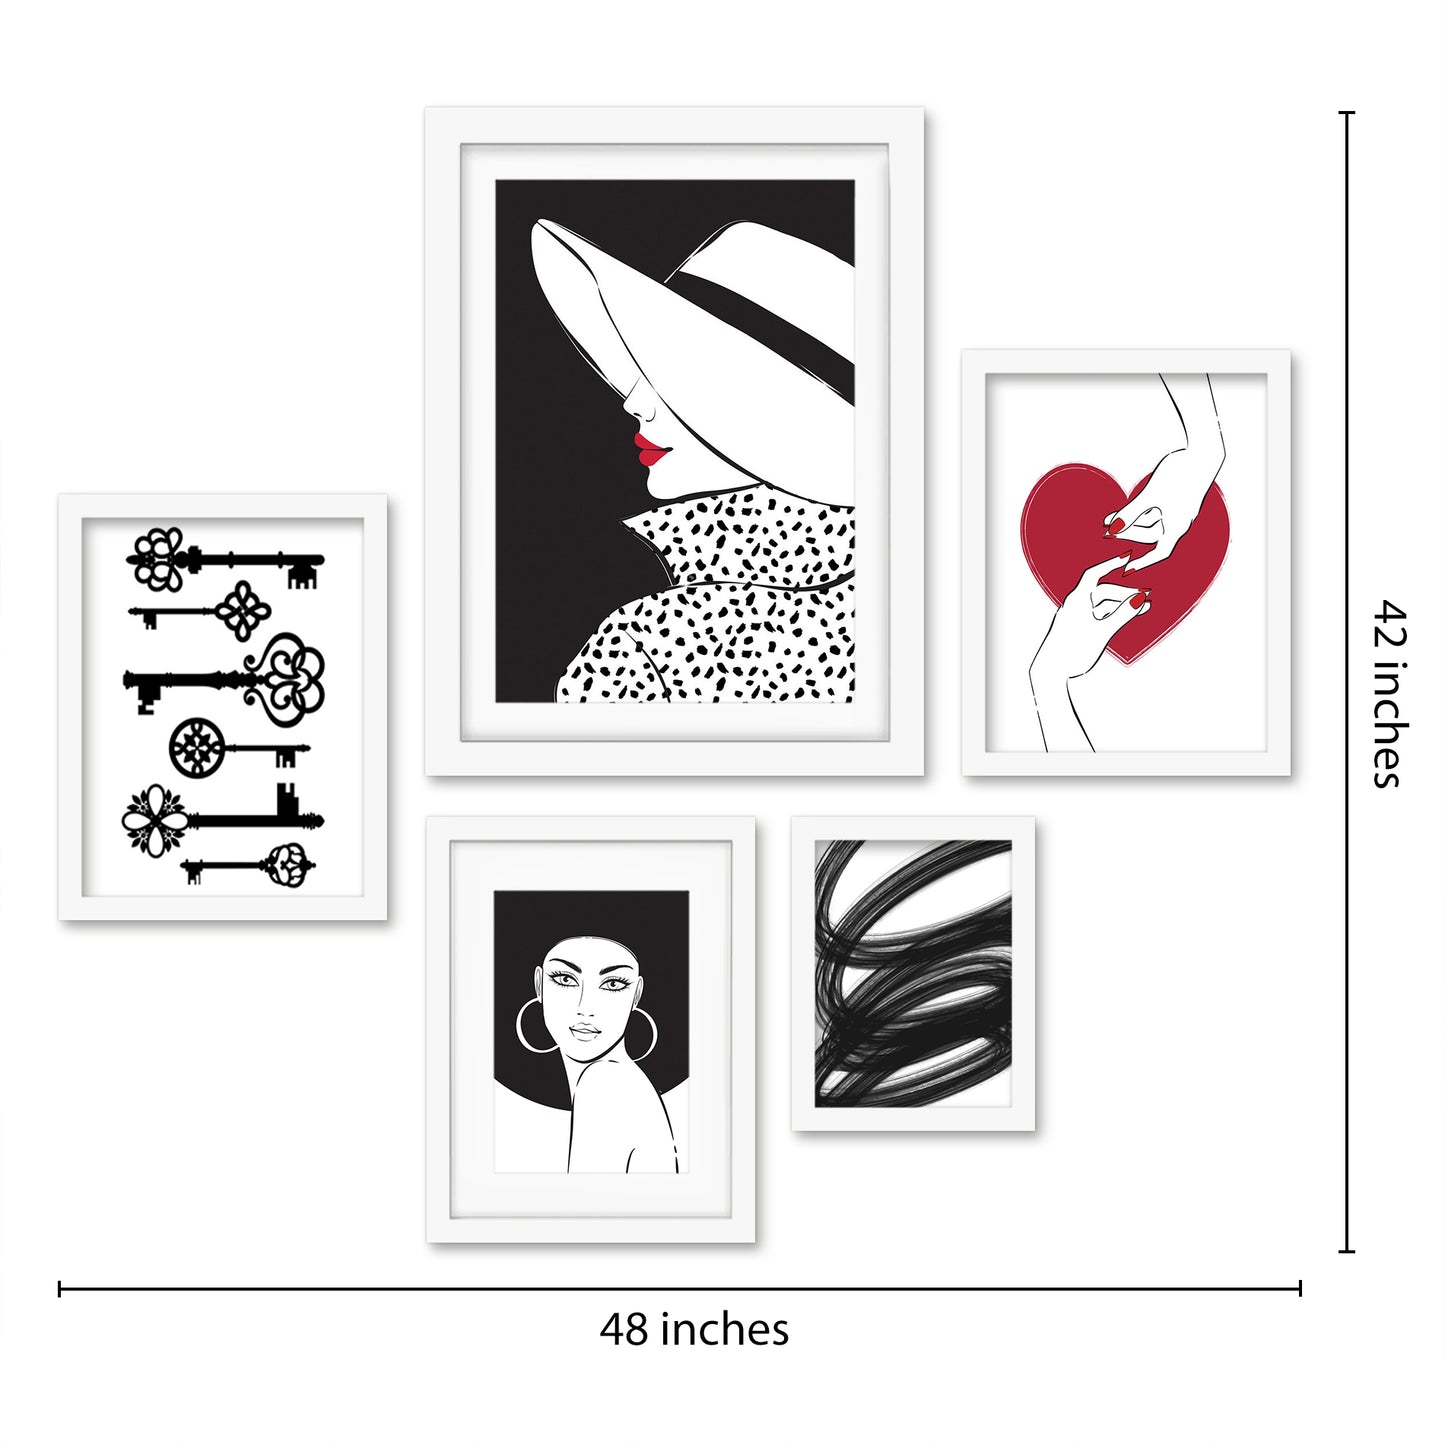 Americanflat 5 Piece Black Framed Gallery Wall Art Set - Black, White & Red Abstract Feminine Wire Art